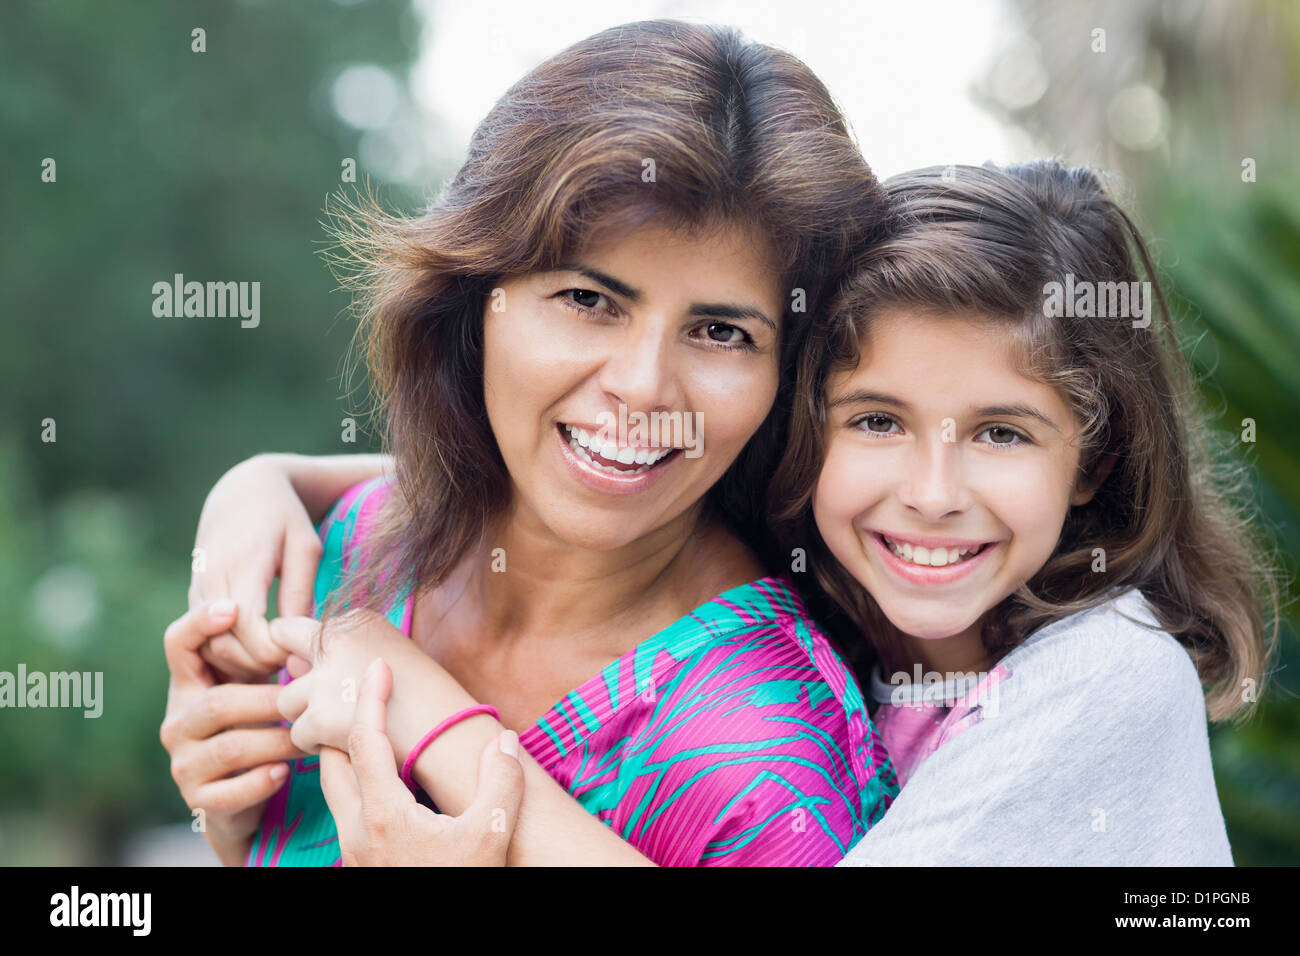 Smiling Hispanic mother and daughter Stock Photo